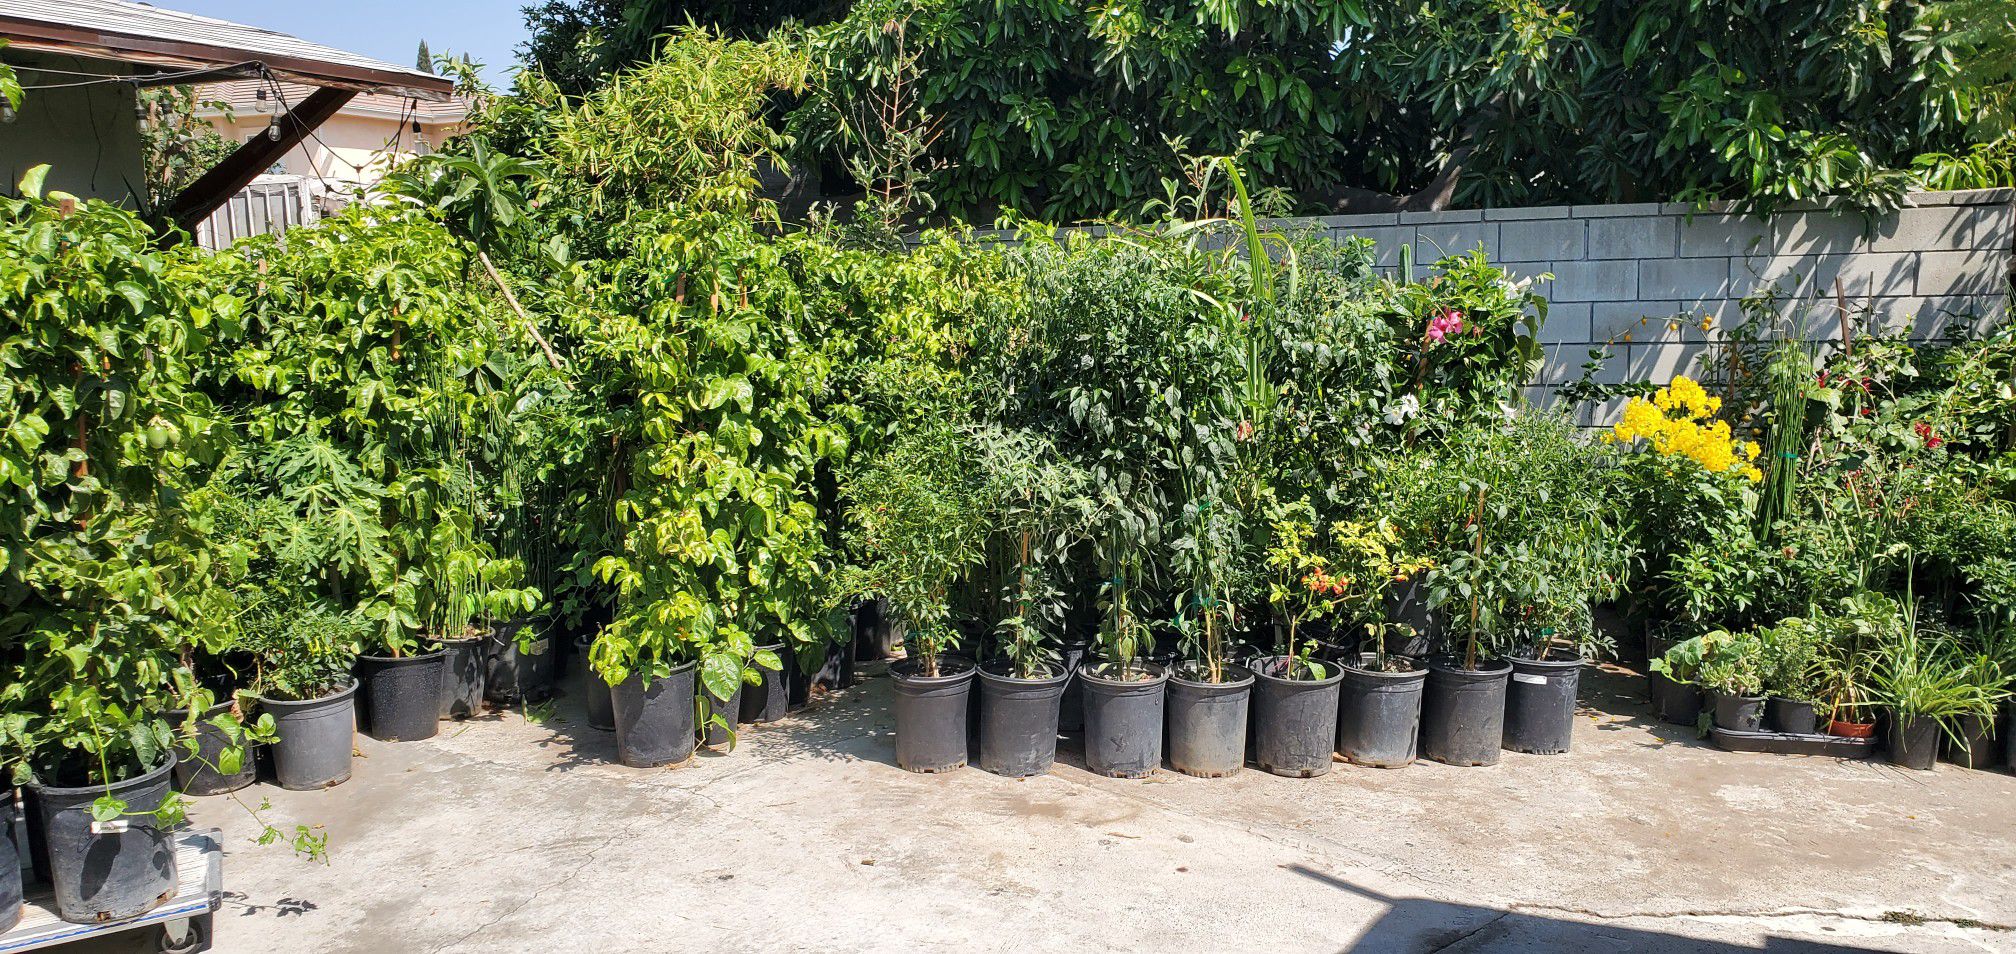 Backyard nursery, all organic plants. Different types and prices